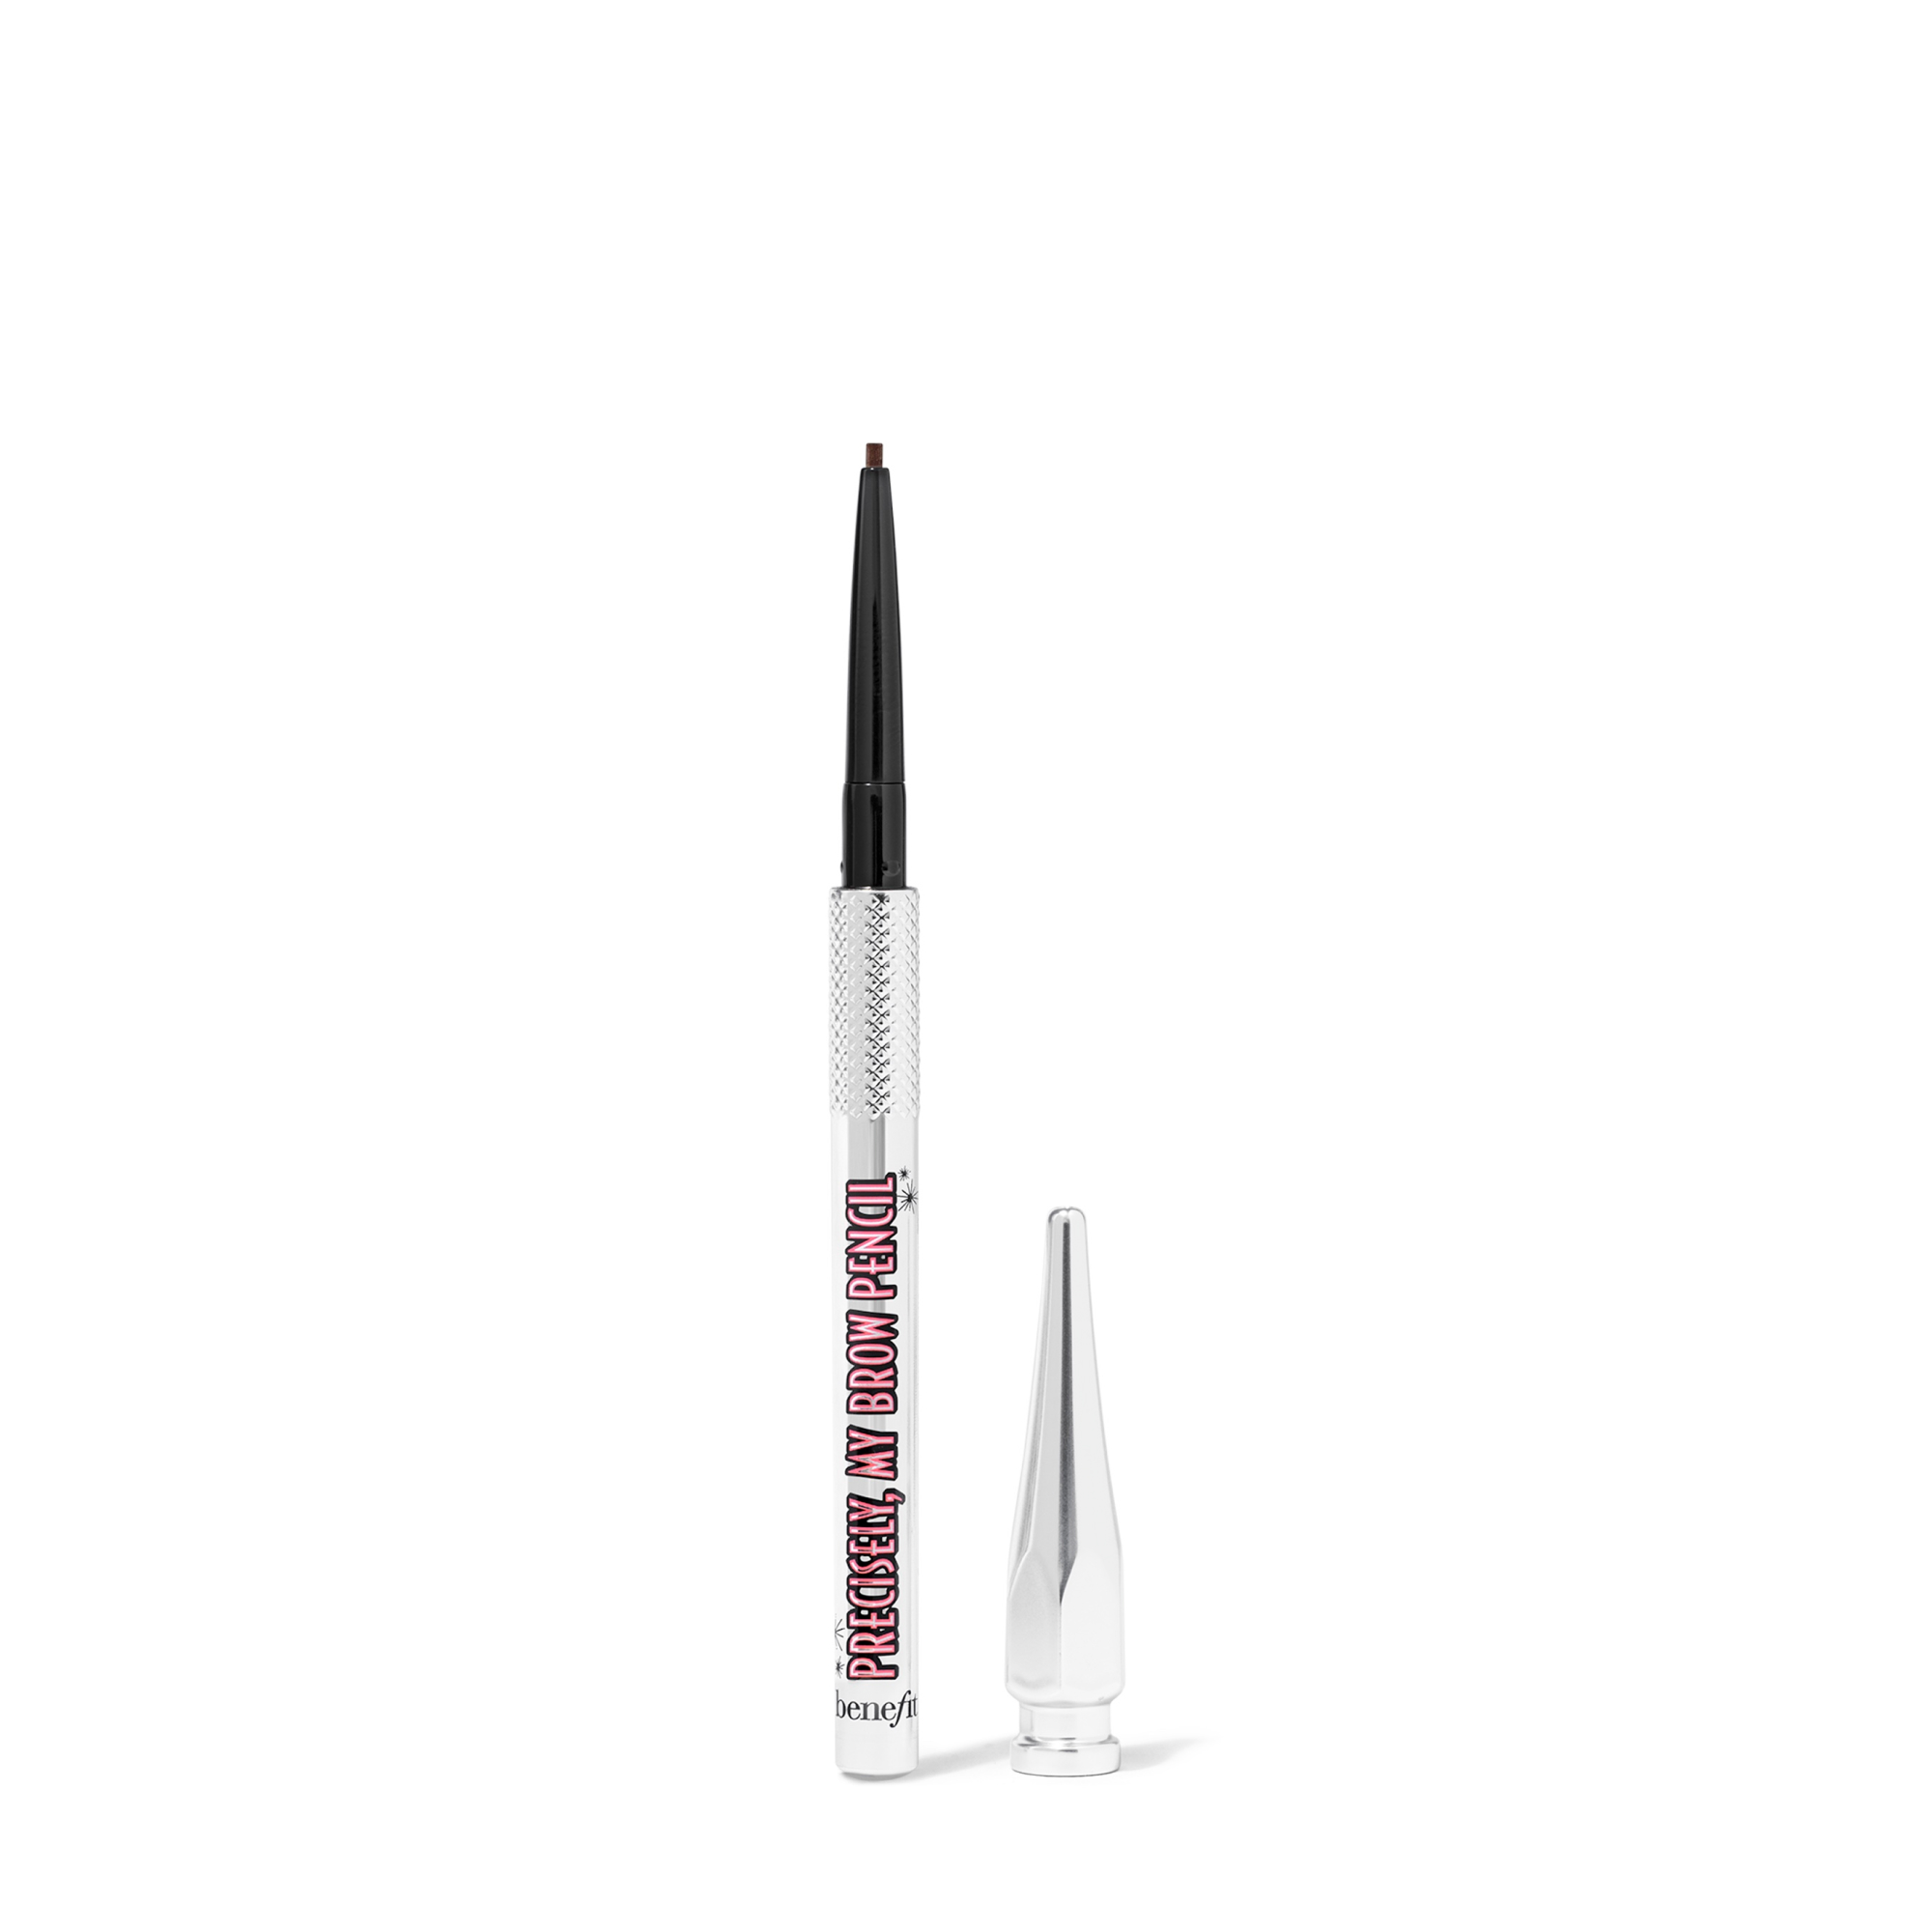 Benefit Cosmetics Precisely, My Brow Travel Size Eyebrow Pencil - In 5 - warm black-brown, Size: Mini